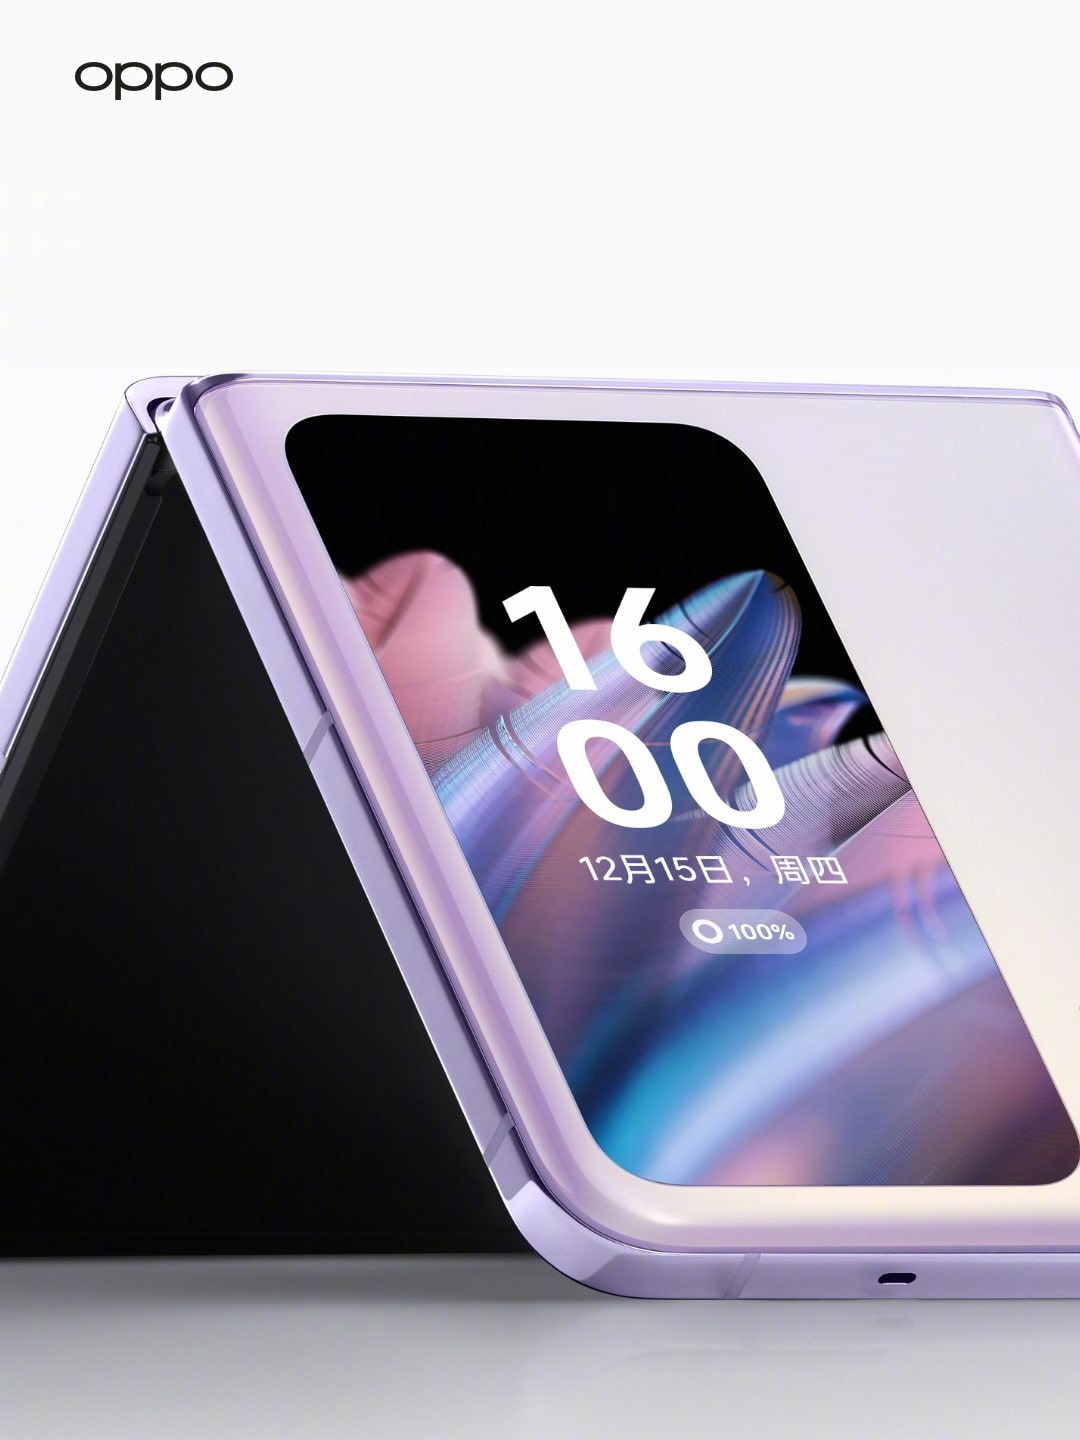 Oppo Pad 2 Key Specifications Tipped, Here's What to Expect - Gizmochina